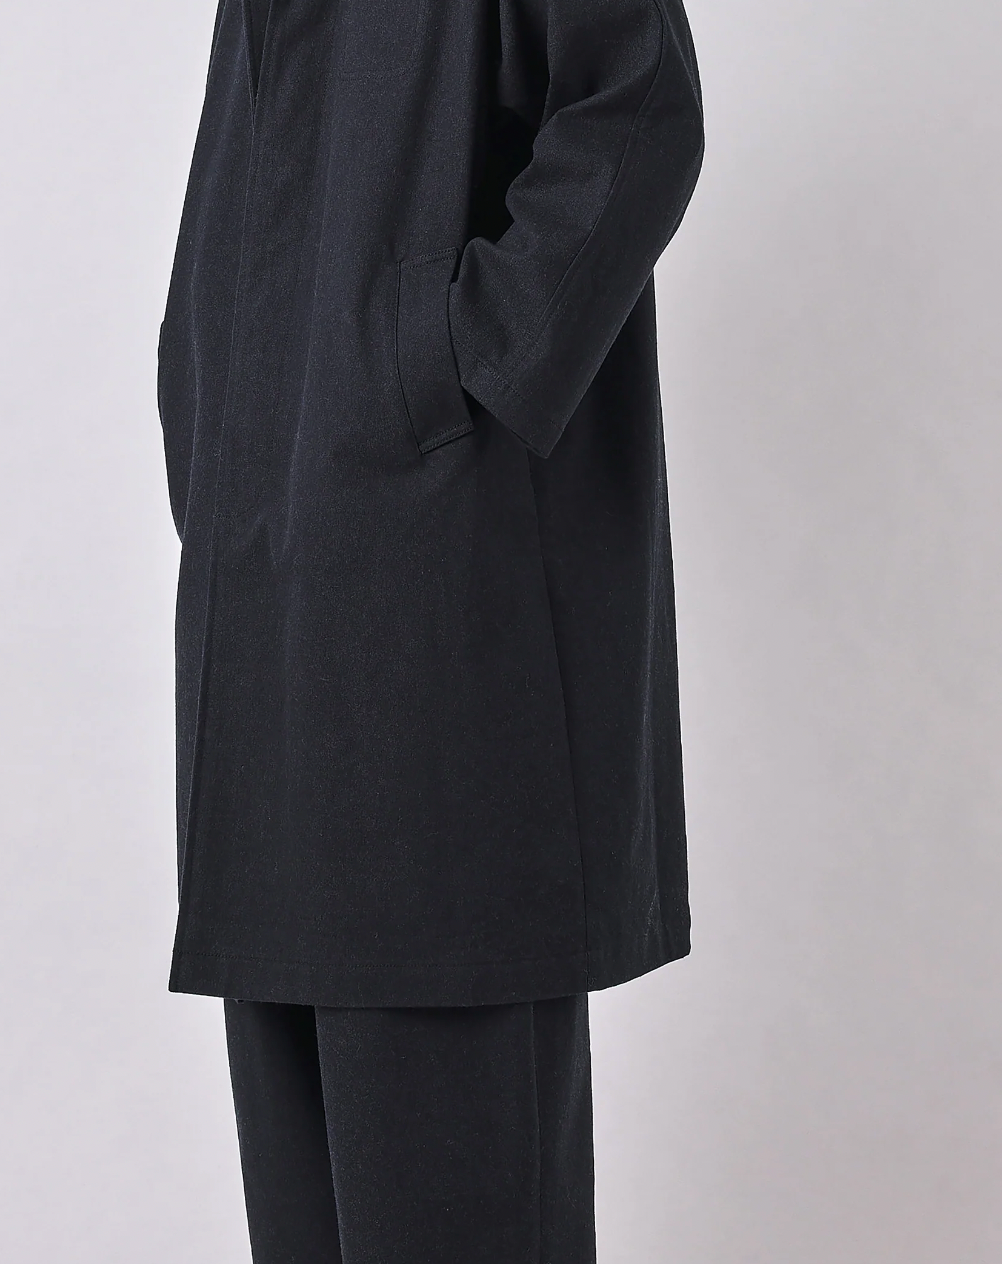 Product Image for Signature Fall Duster, Navy Black